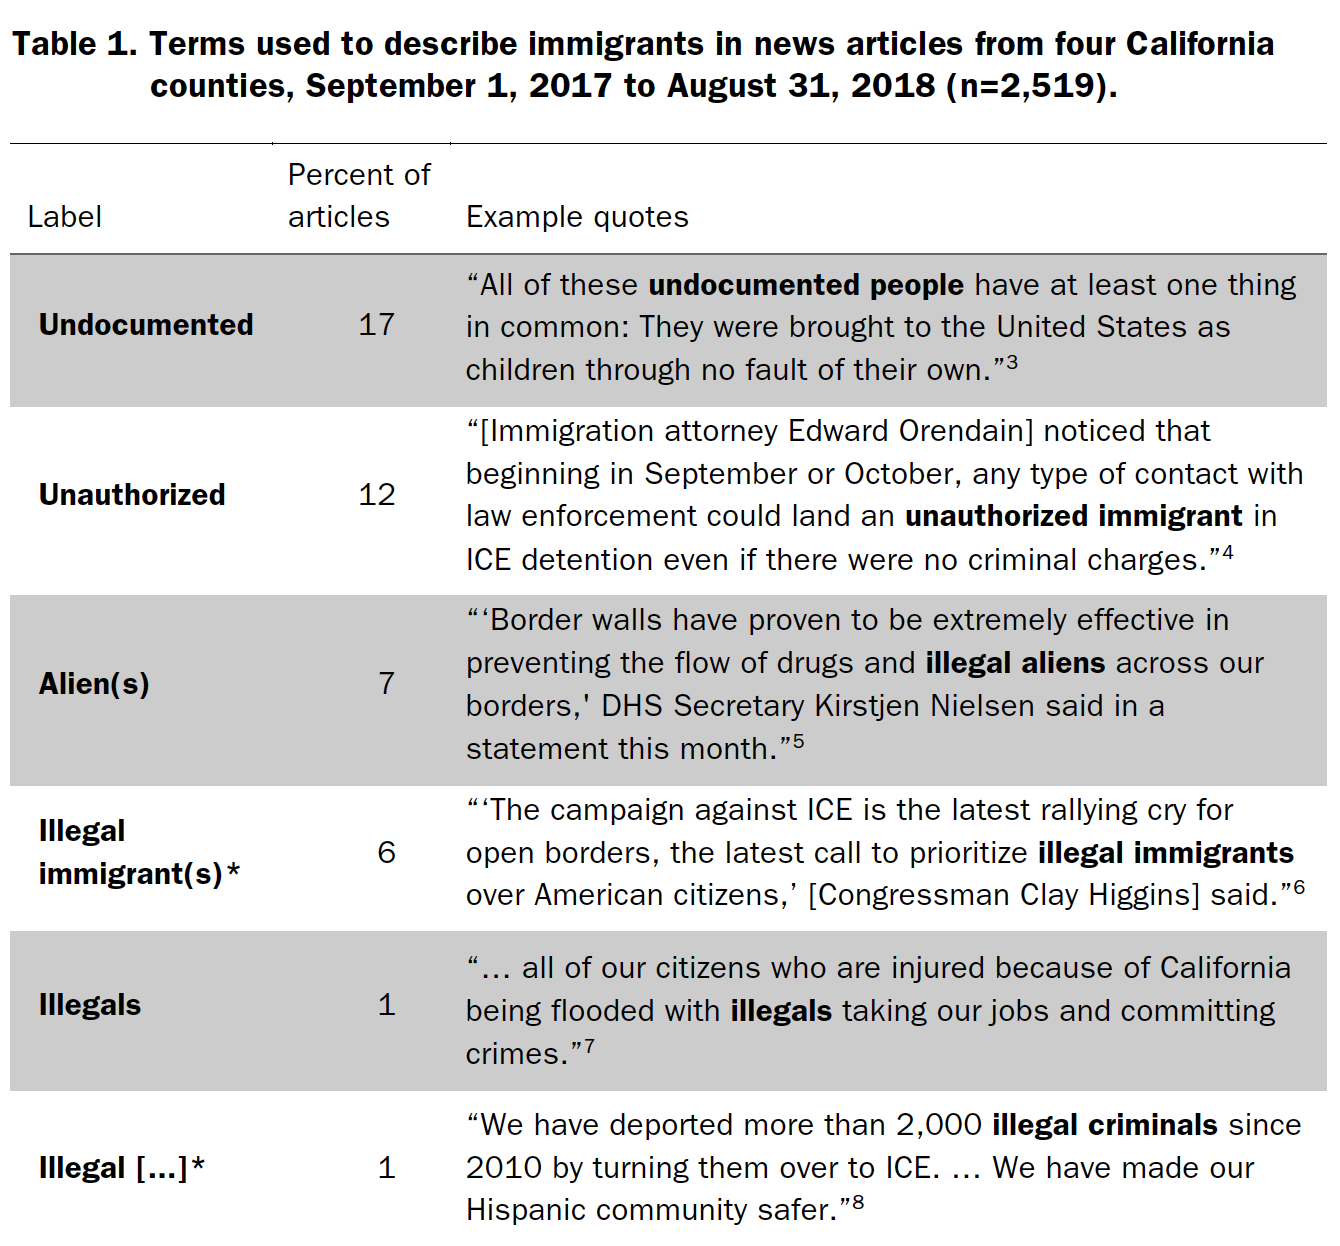 Table 1. Terms used to describe immigrants in news articles from four California counties, September 1, 2017 to August 31, 2018 (n=2,519).